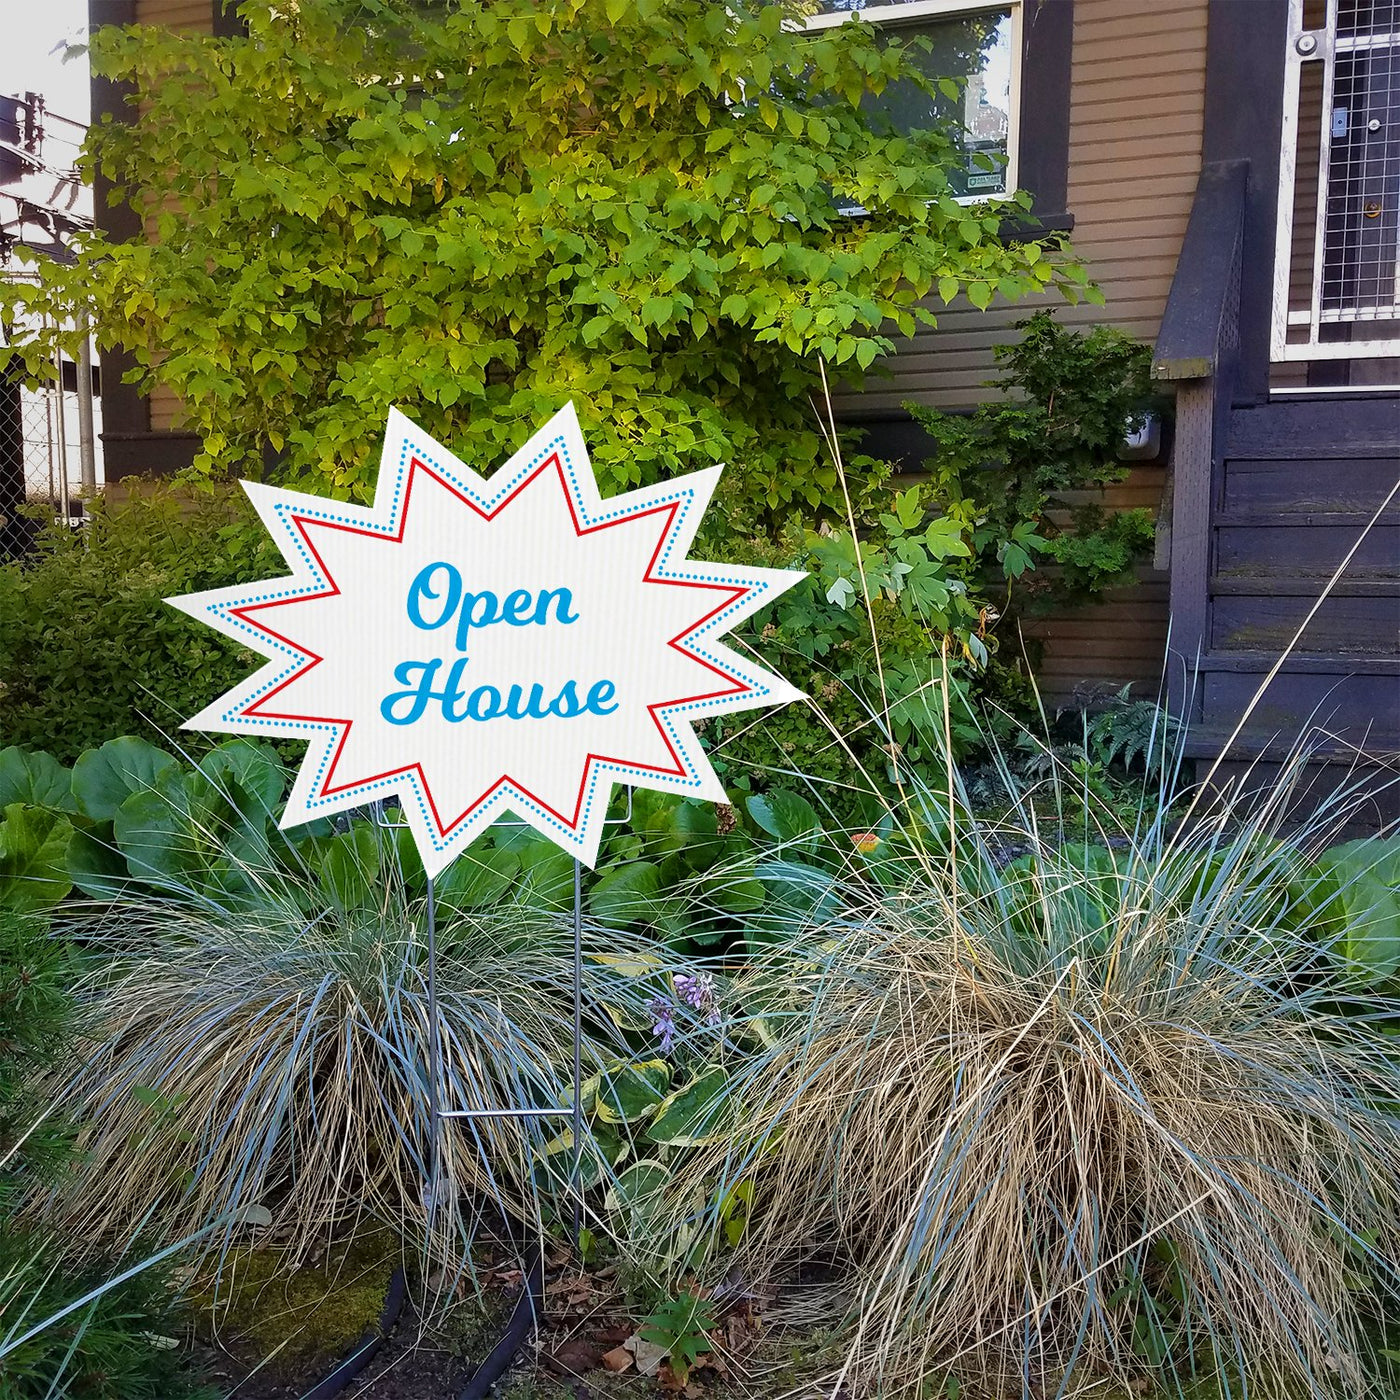 Open House- Explosion Yard Sign - All Things Real Estate